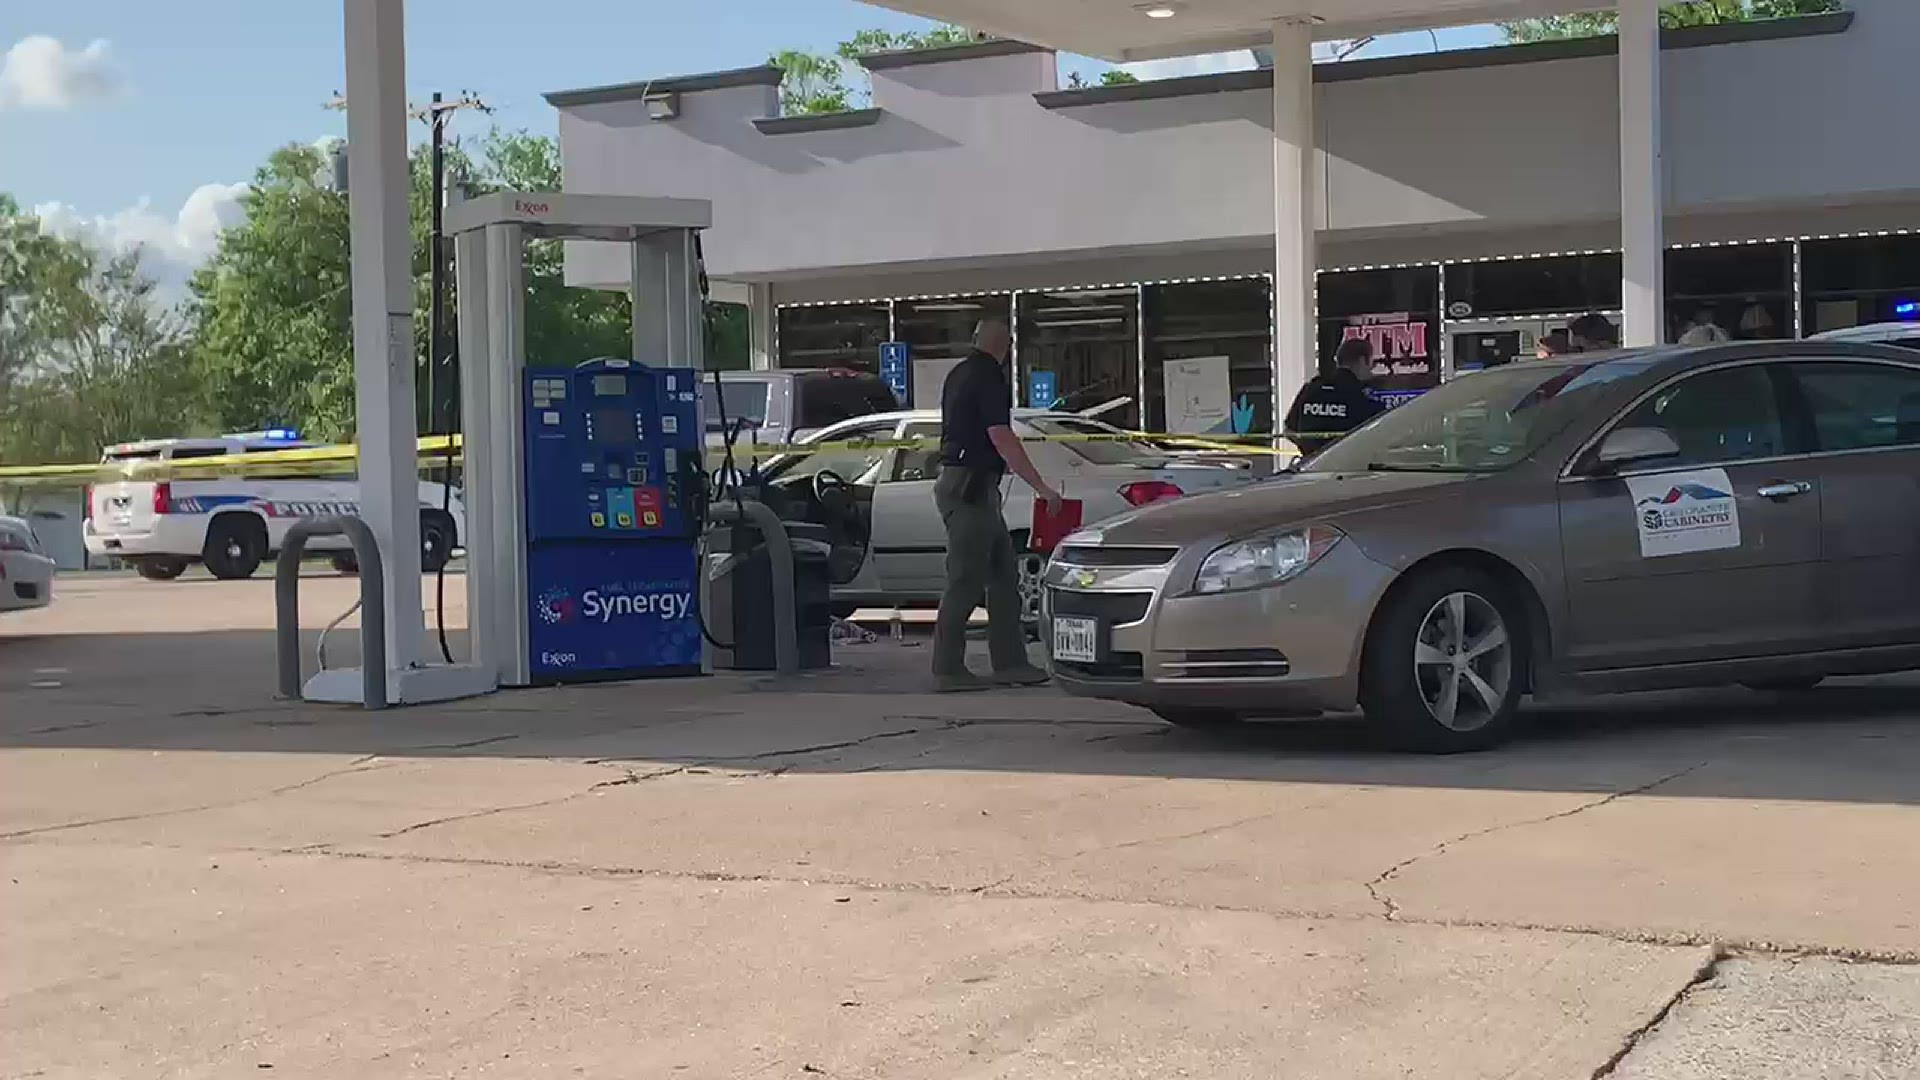 Two men from Orange are in police custody in connection with a Monday shooting that sent one Louisiana man to the hospital, according to a news release.